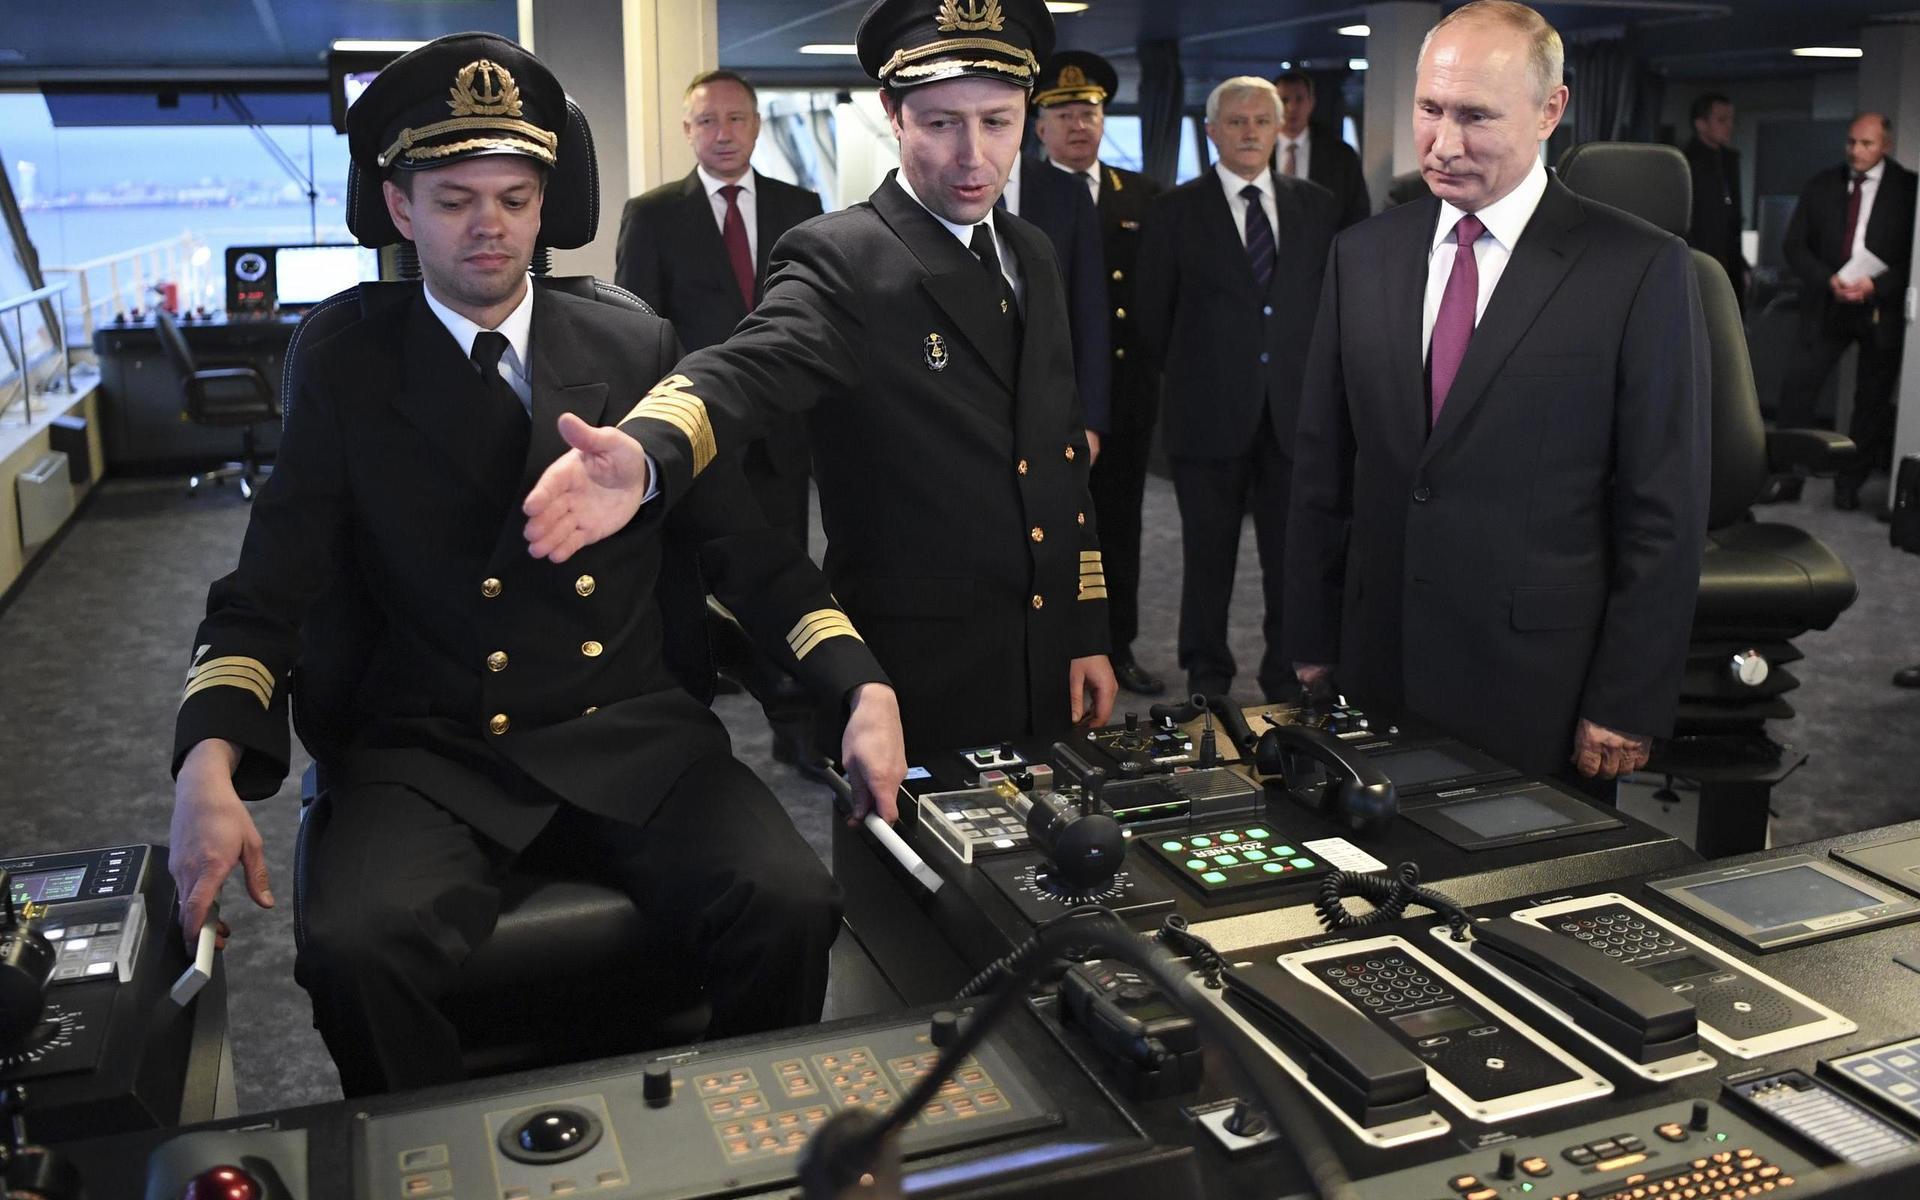 Russian President Vladimir Putin, right, visits the captain&apos;s bridge of the newly built diesel-electric icebreaker &quot;Viktor Chernomyrdin&quot; in St. Petersburg, Russia, Tuesday, Nov. 3, 2020. Putin said that Russia will expand its fleet of icebreakers as part of its efforts to develop the Arctic territories. (Alexei Nikolsky, Sputnik, Kremlin Pool Photo via AP)  XAZ103